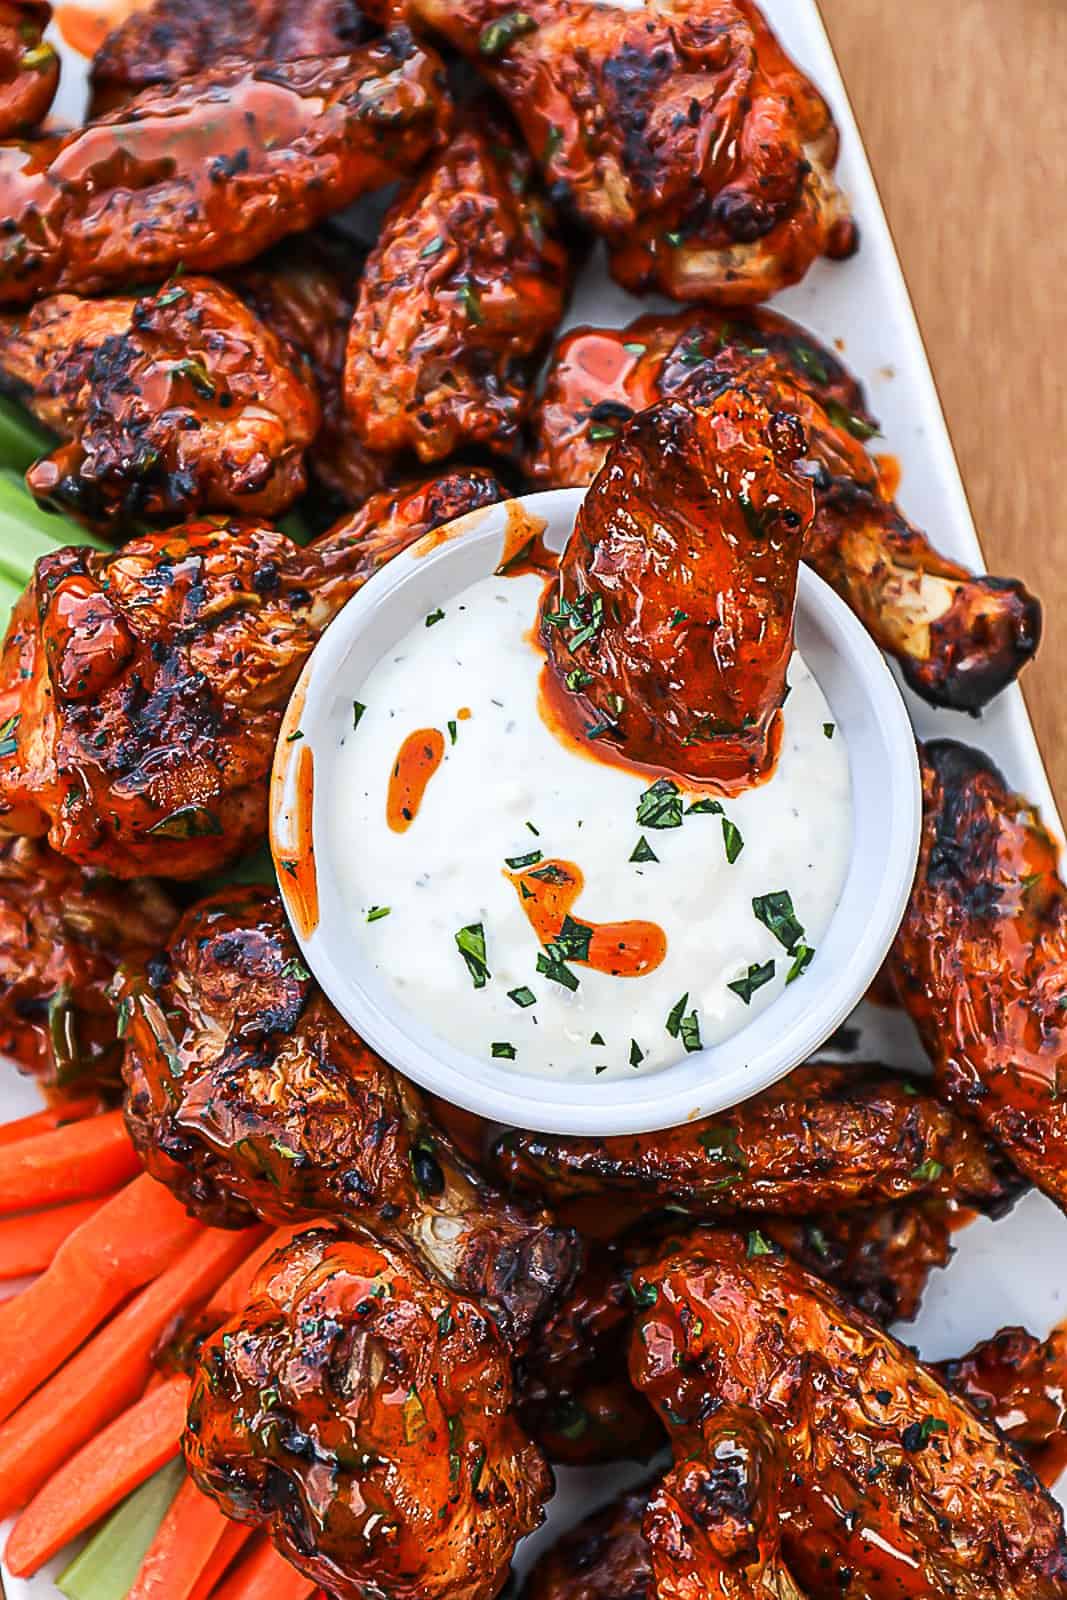 Grilled Buffalo Chicken Wings Recipe with blue cheese dip